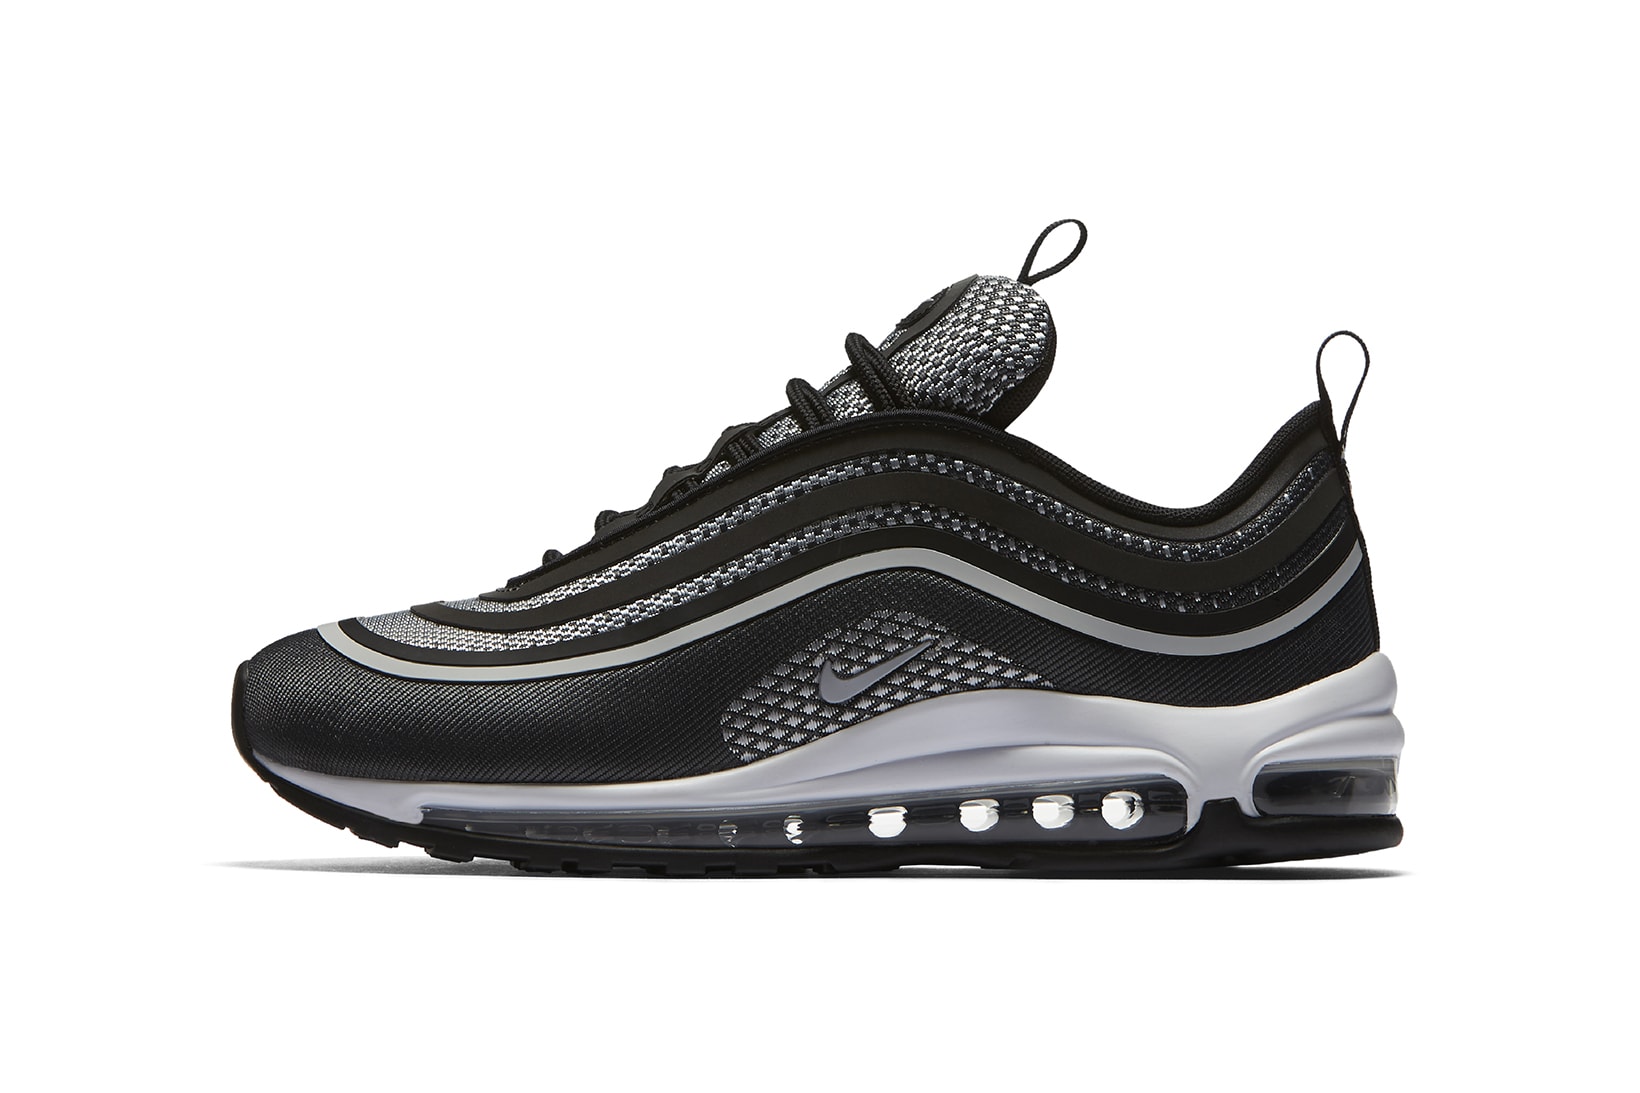 Nike Air Max 97 Ultra 2017 Fall Releases Colorways Sneakers Shoes Footwear August 17 5 Release Date Info